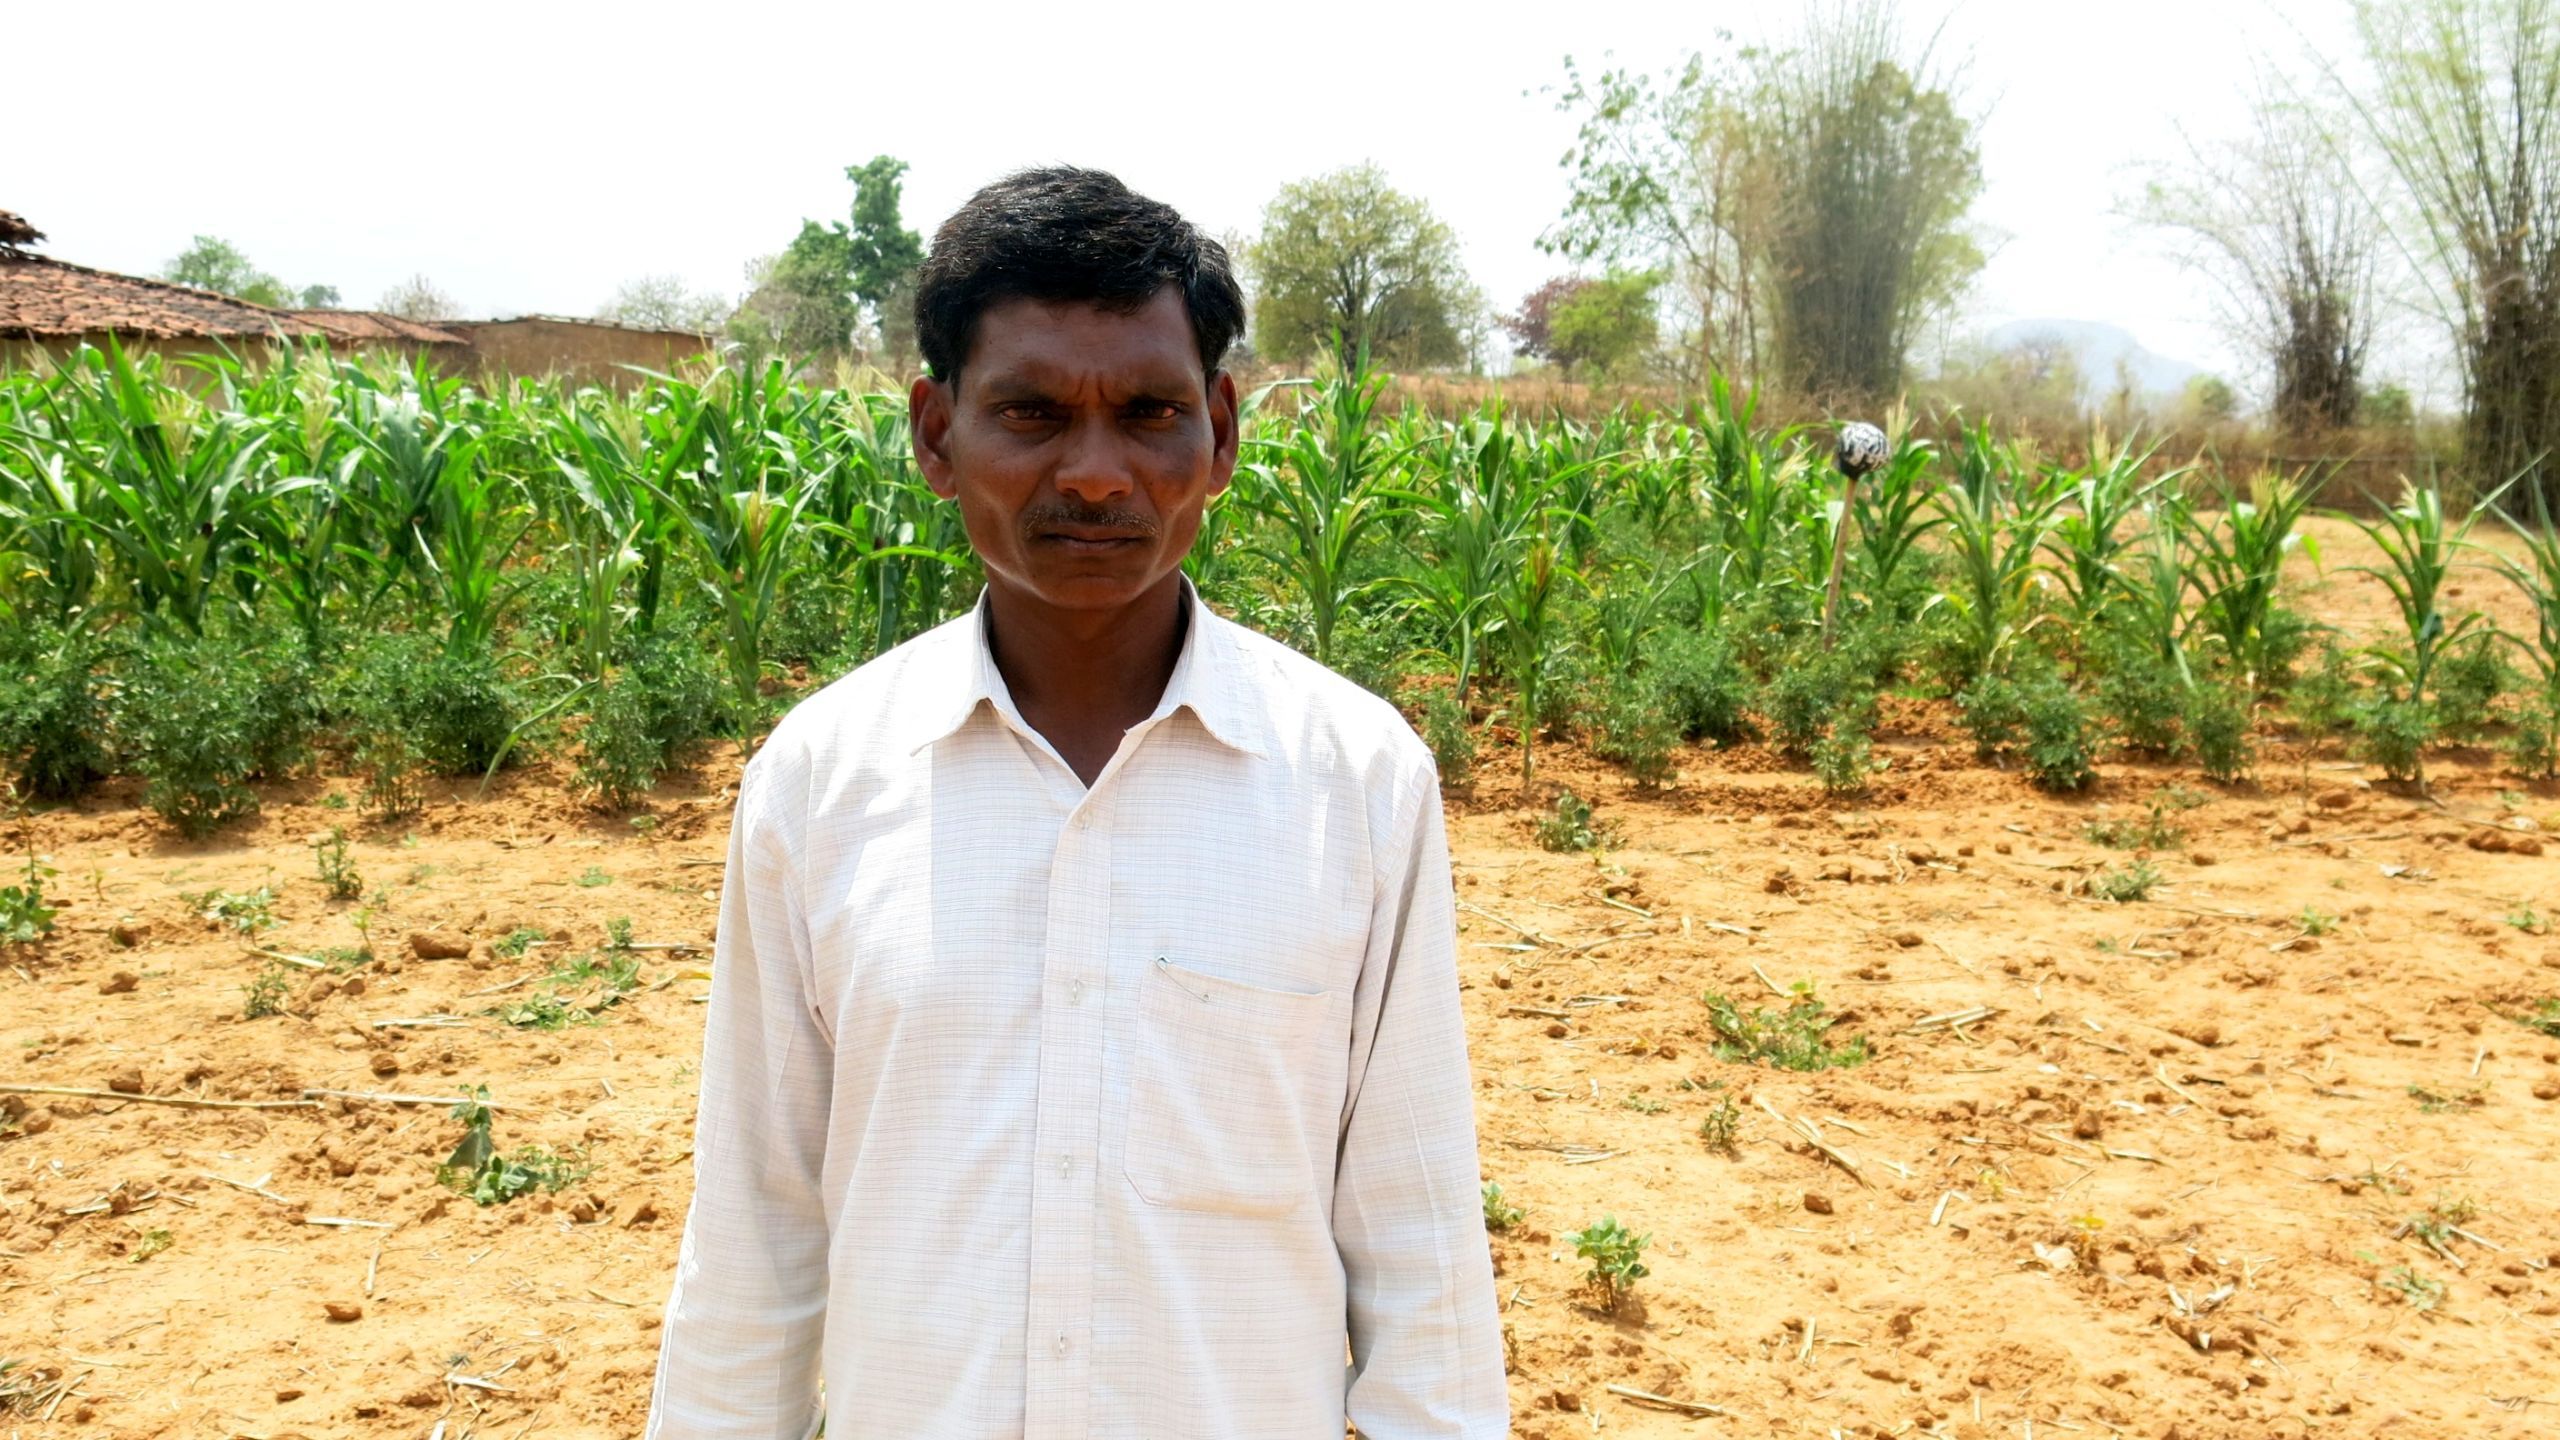 Pannalal Sai (above) and Babulal Salaam (below) are among the scores of villagers who found their lands being forcibly earmarked by district officials over 2016-18 for a compensatory plantation project. Over 4000 acres in 16 villages have been earmarked for the plantation, crafted in lieu of lush forests to be cut down for the Parsa coal block in adjoining Sarguja district's Hasdeo Arand. Chhattisgarh, India. June 2019. Image by Chitrangada Choudhury.